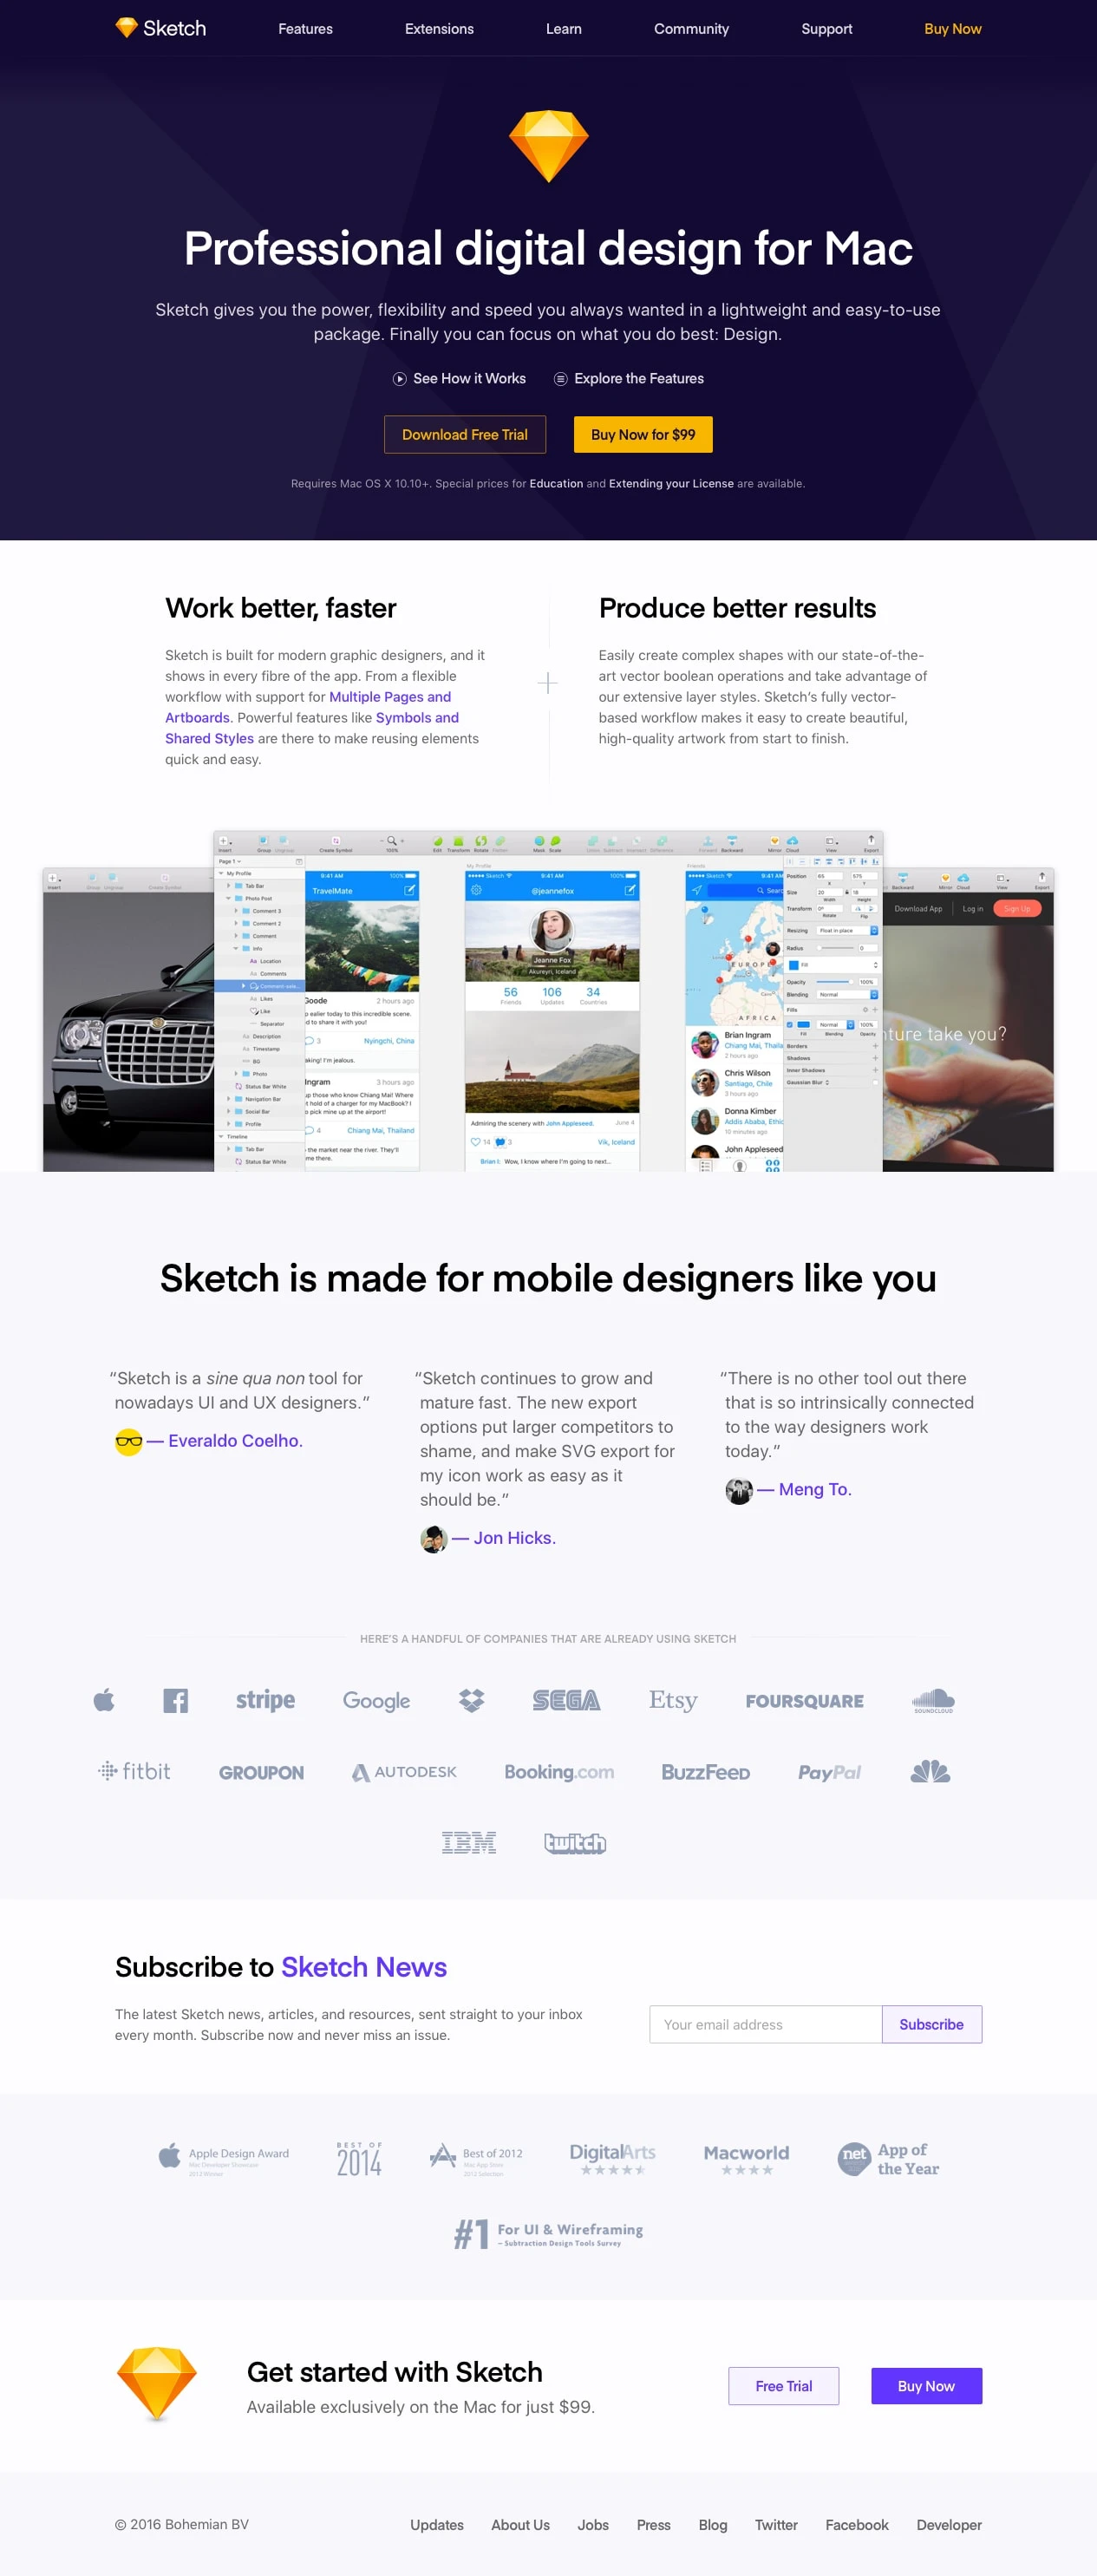 Sketch Landing Page Example: Sketch gives you the power, flexibility and speed you always wanted in a lightweight and easy-to-use package. Finally you can focus on what you do best: Design.